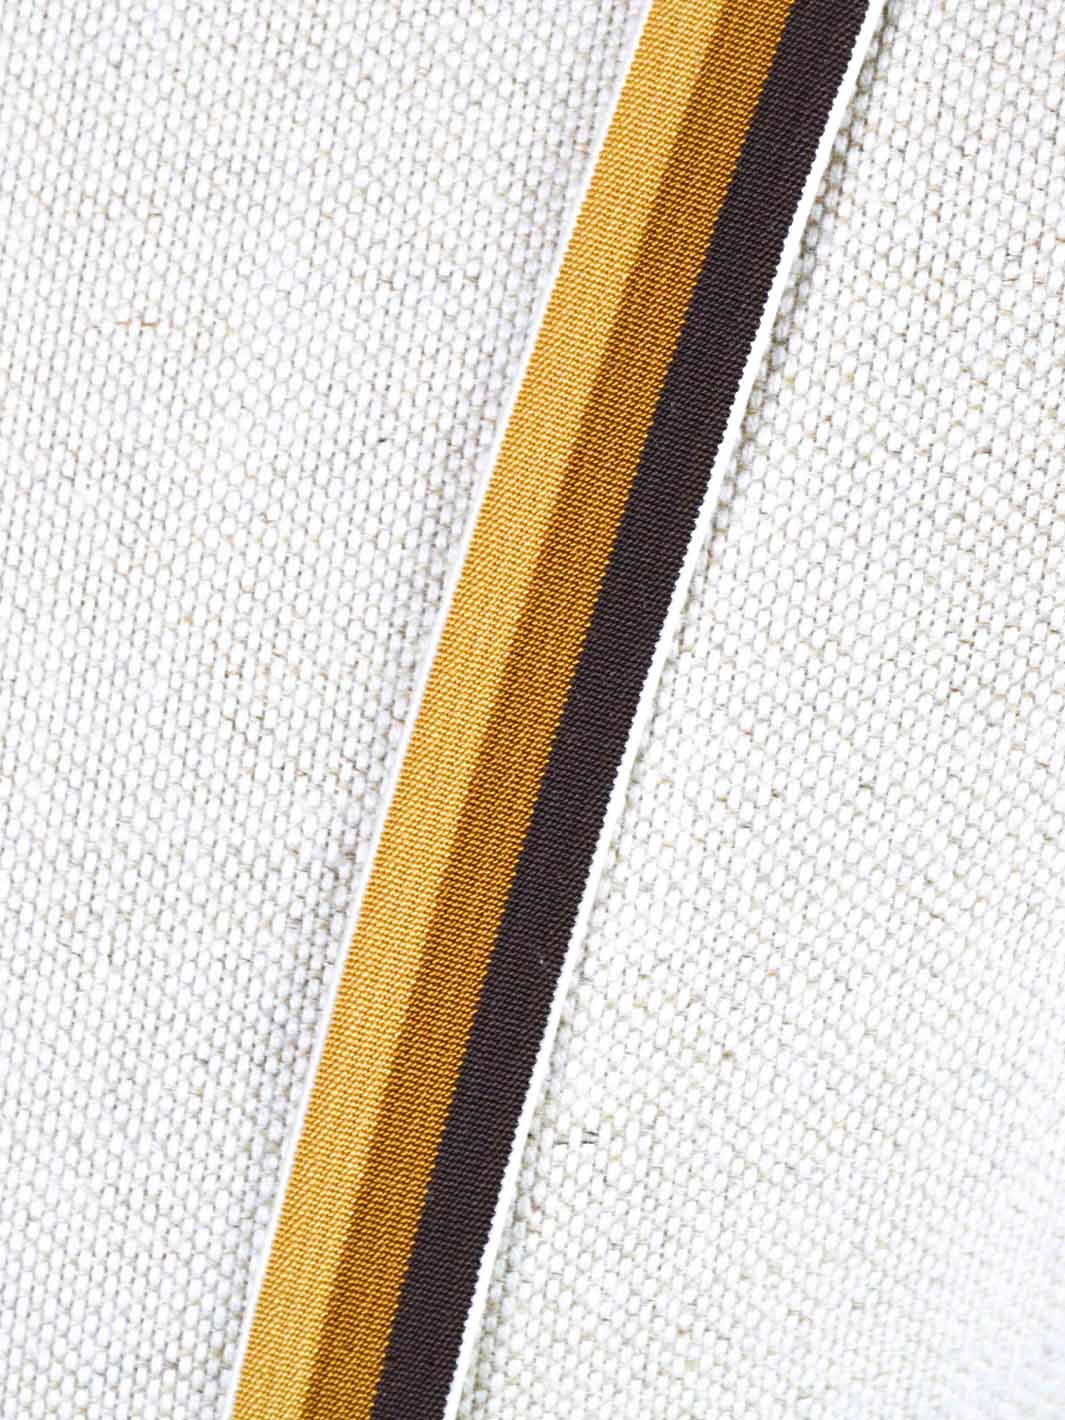 1970s striped thin suspenders in shades of brown